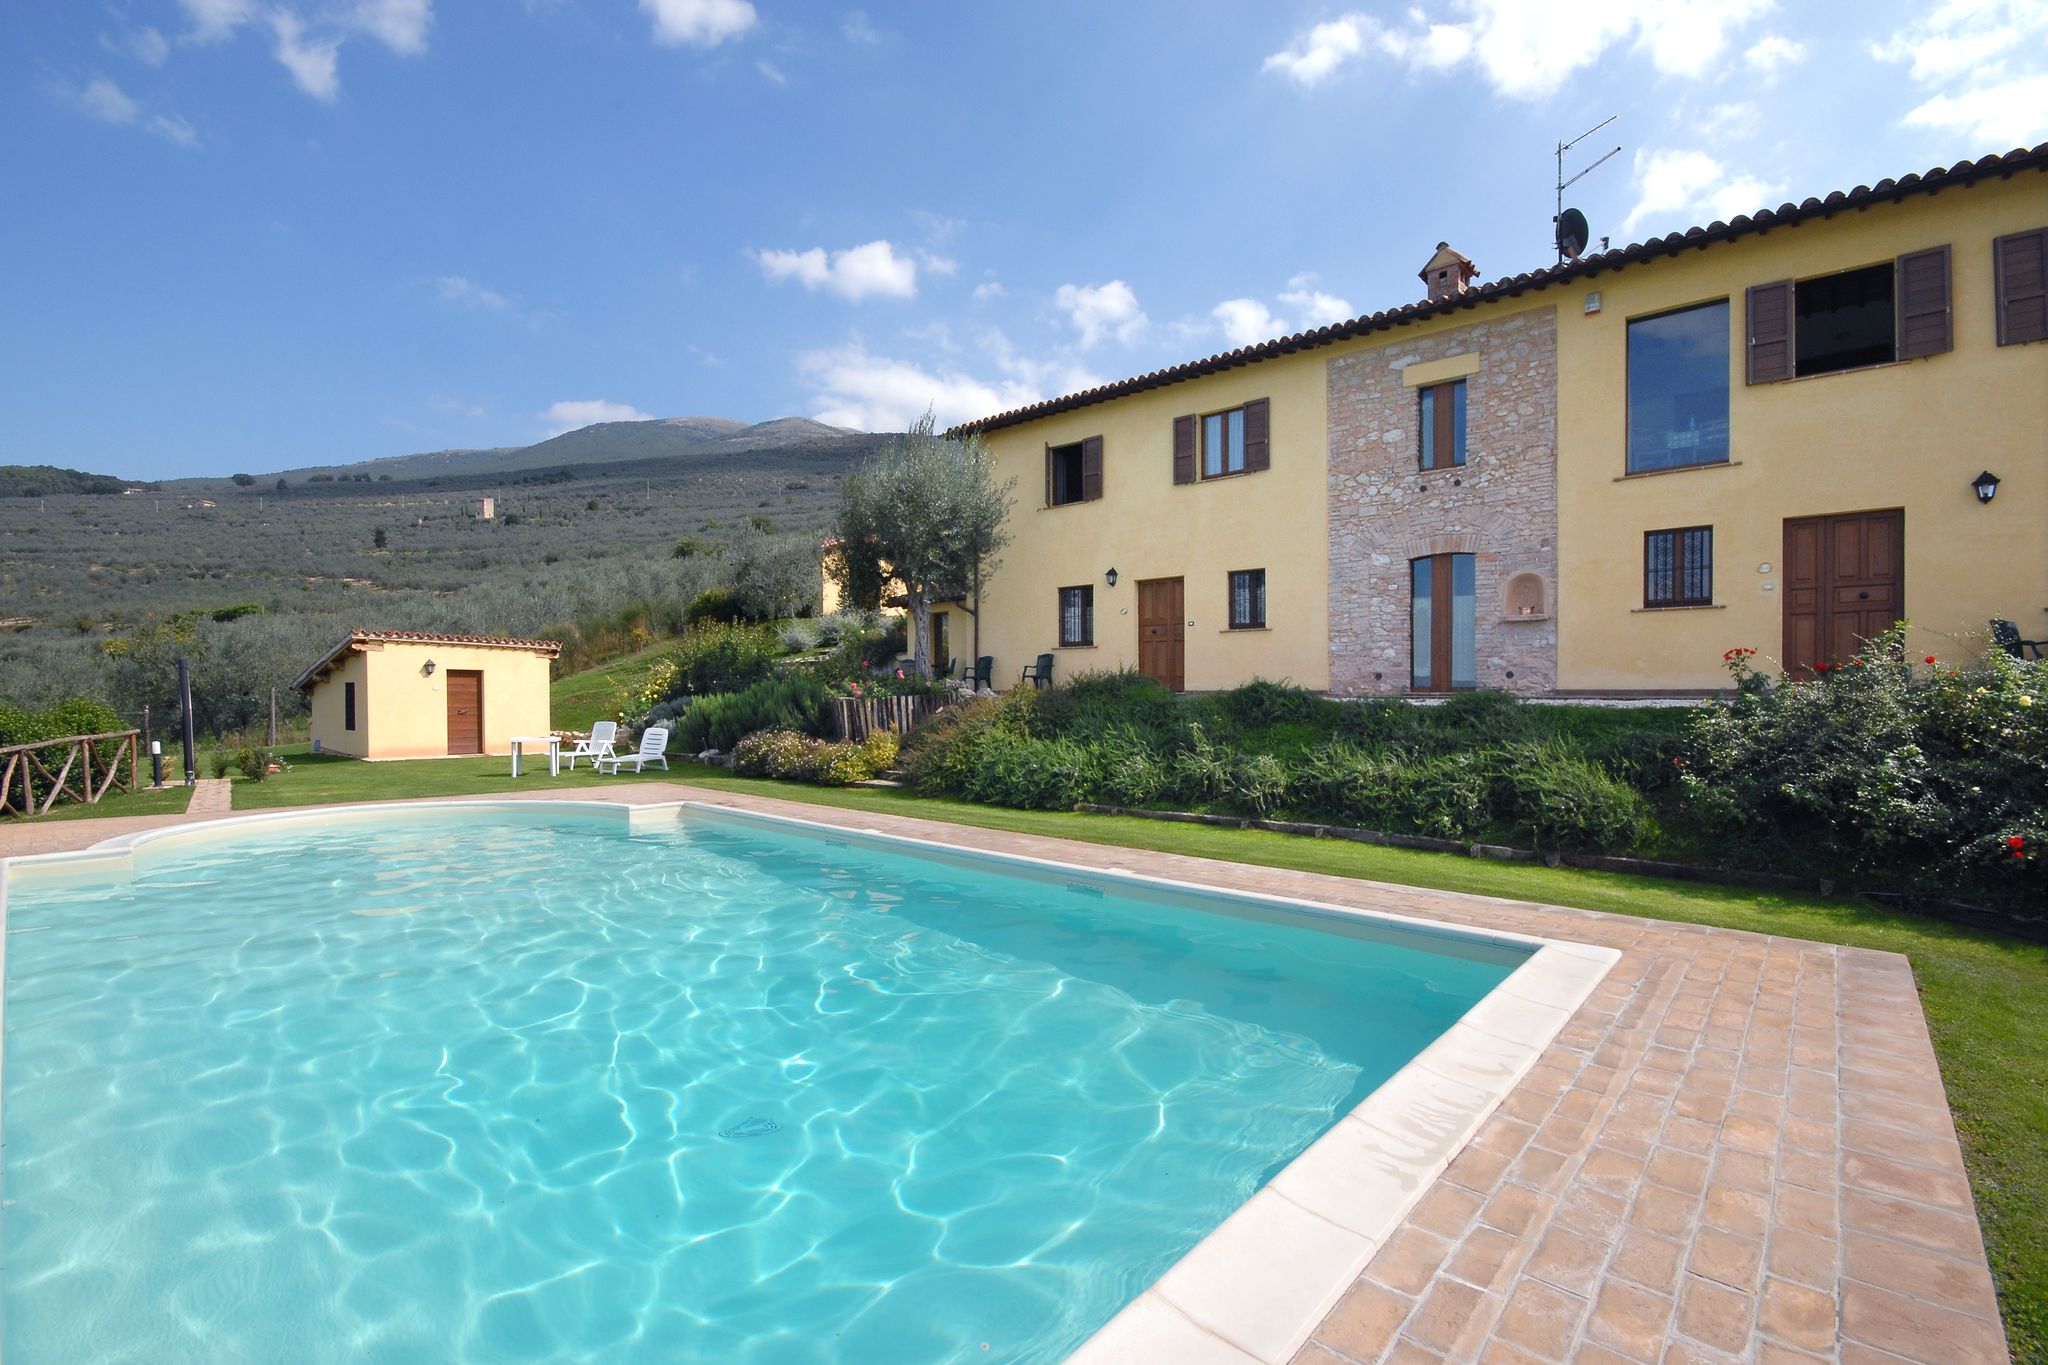 Agriturismo in the hills, private terrace, swimming pool and beautiful view